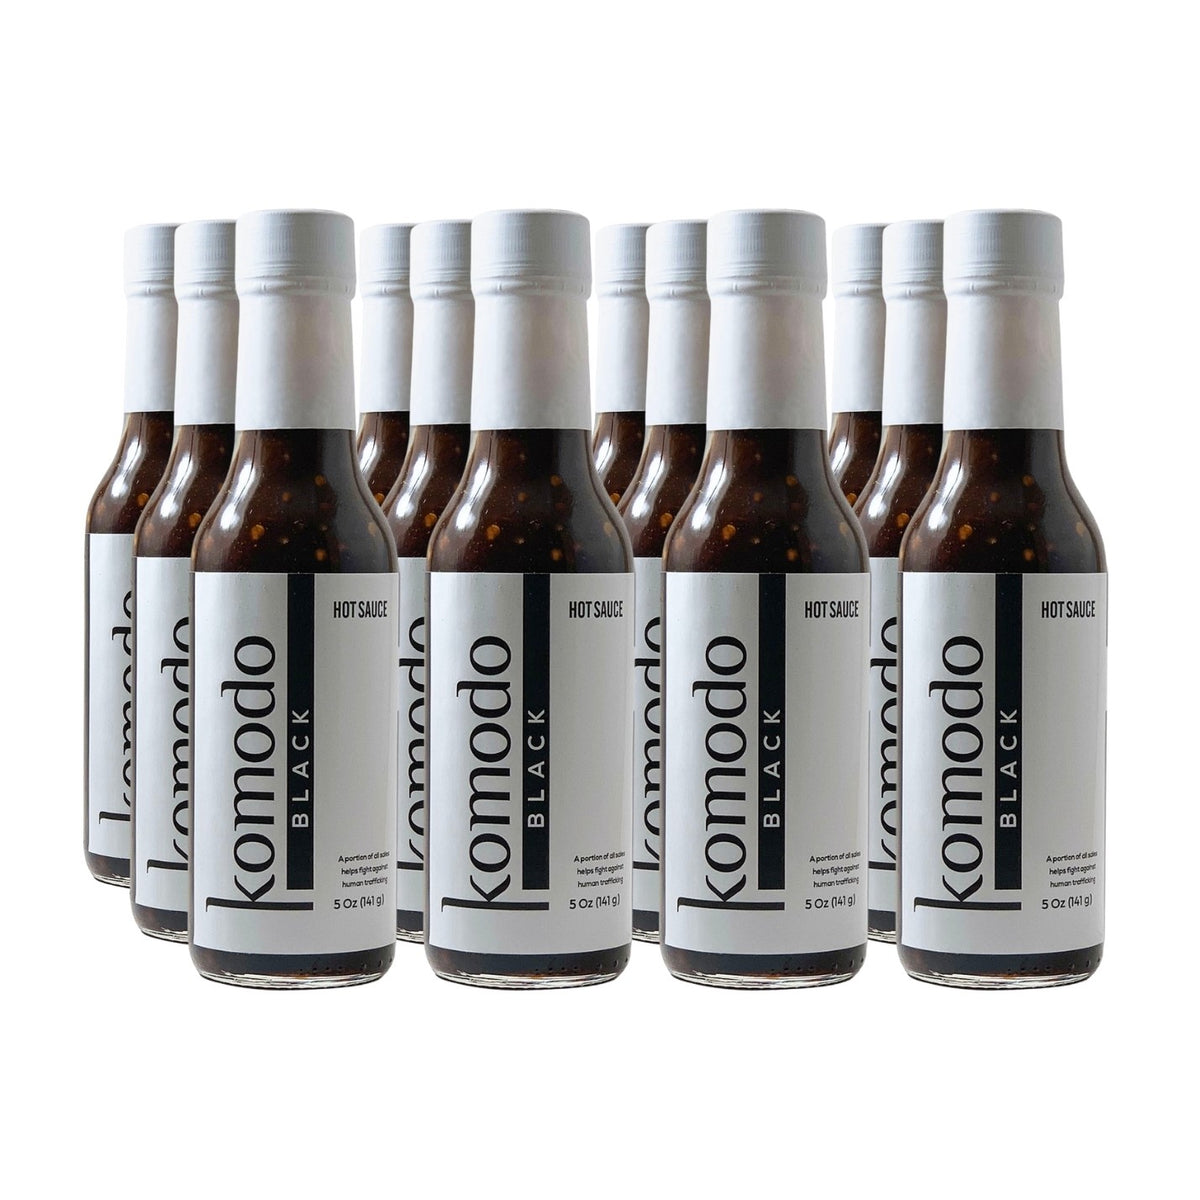 Komodo Black has a sweet and spicy flavor layered with an Indonesian soy sauce. Komodo Sauces taste amazing on pretty much everything.  Black is especially great on meat and seafood. You can mix it with your favorite sauce, use it as a marinade, or put it in a delicious soup - the choice is yours.